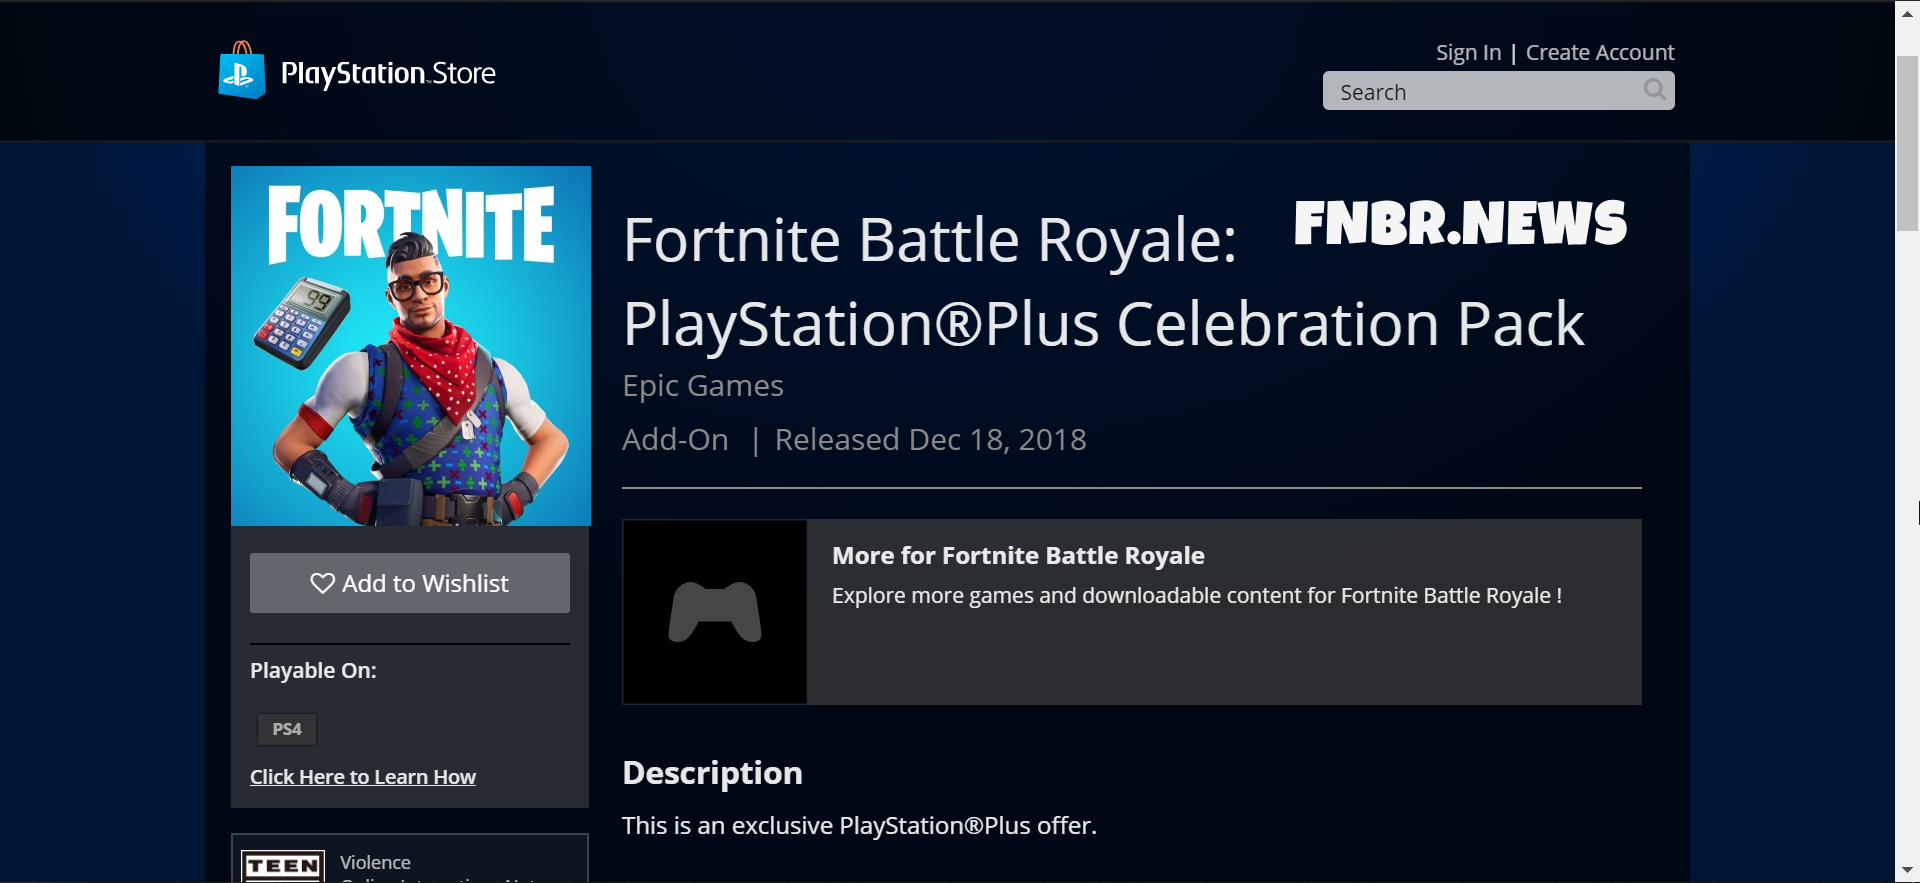 Fortnite Playstation Plus Celebration Pack Available Now Fortnite - a brand new starter pack is now available for fortnite battle royale it is yet another playstation plus pack and is free to download in the us right now